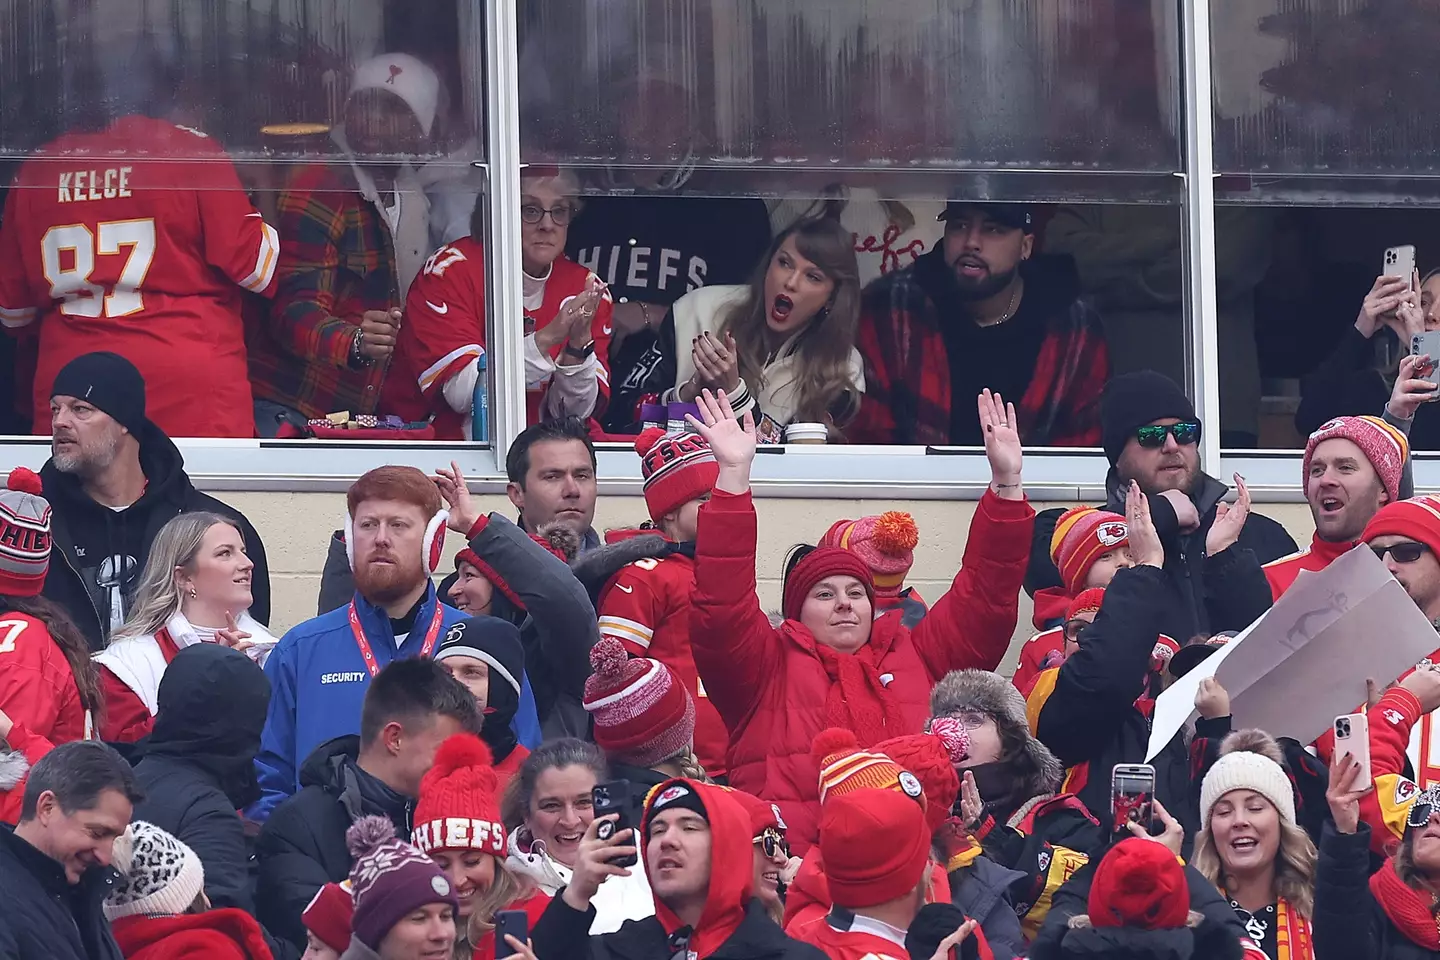 Taylor Swift has attended multiple Kansas City Chiefs games.